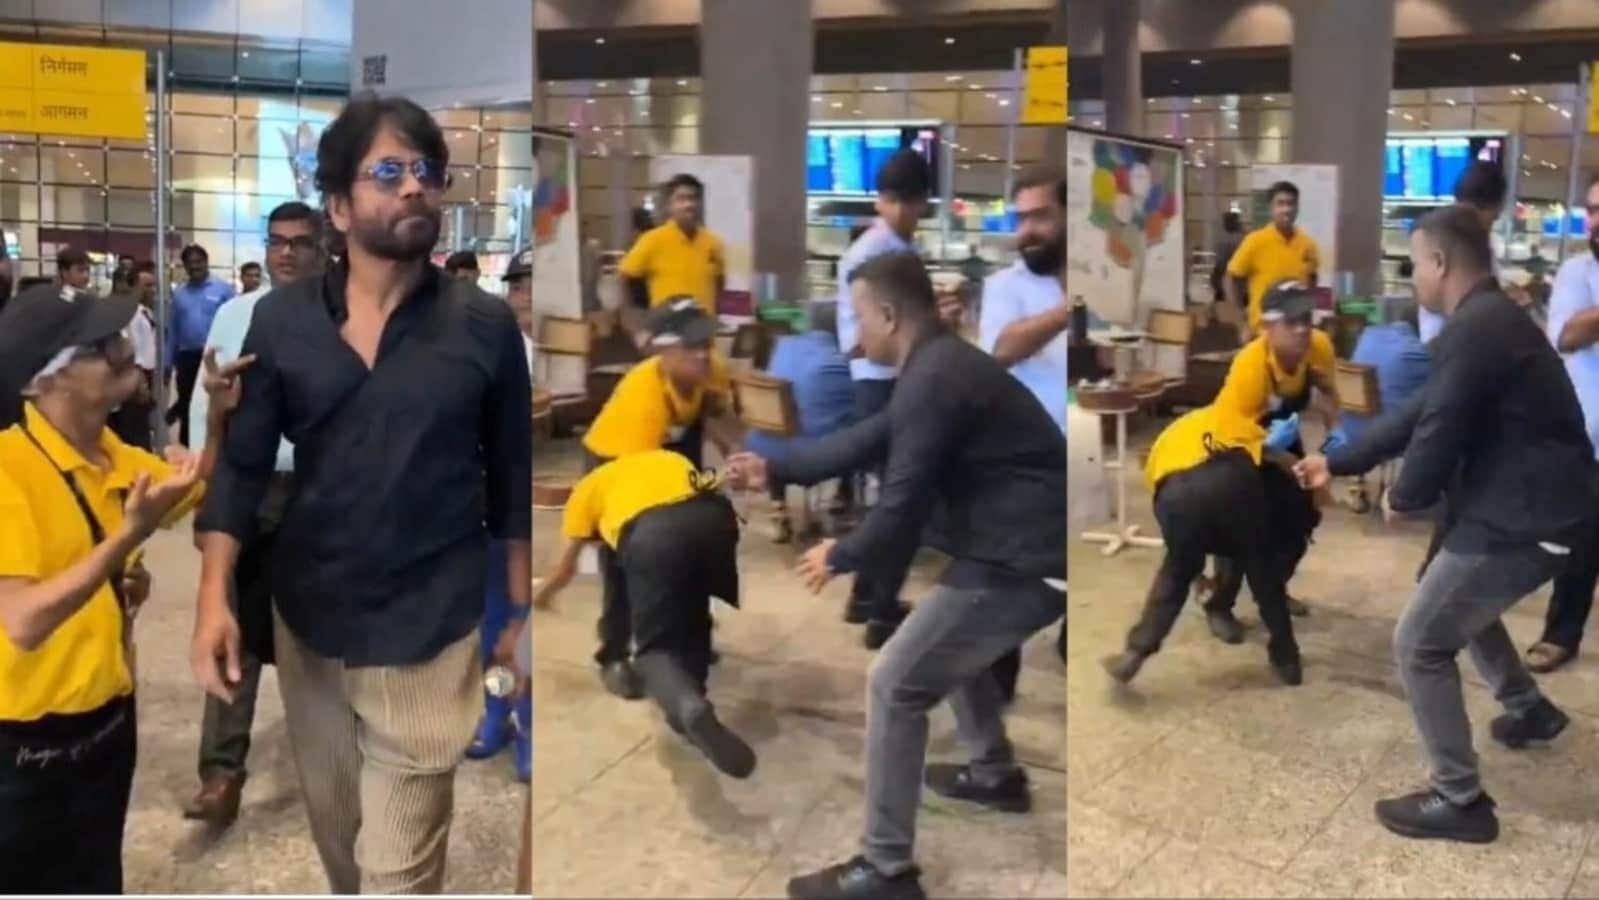 'Shouldn't have happened': Nagarjuna apologizes after bodyguard pushes differently-abled fan